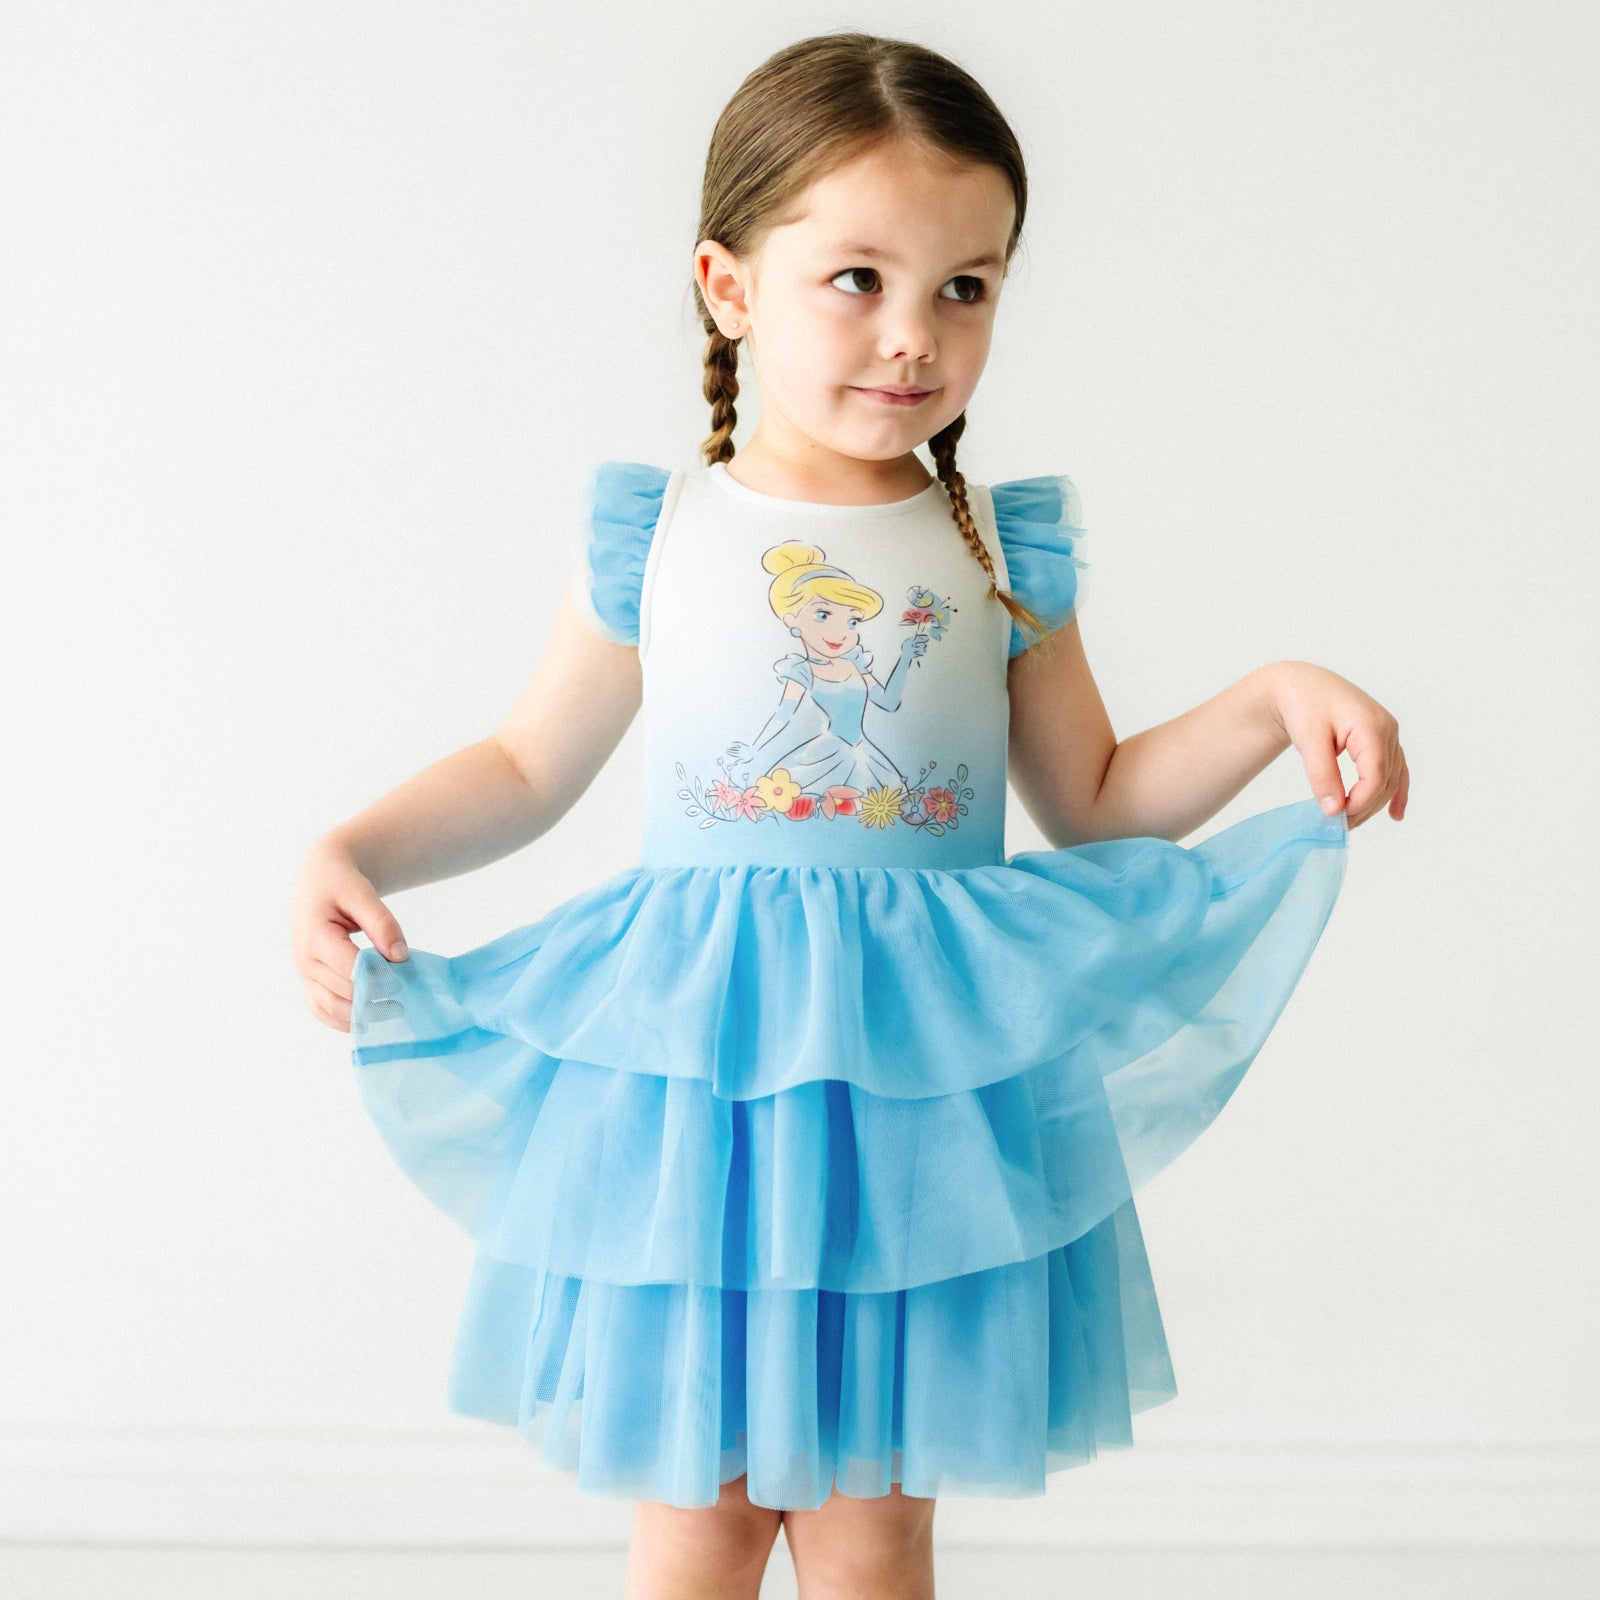 Child wearing a Cinderella flutter tiered tutu dress, holding out the sides of the dress